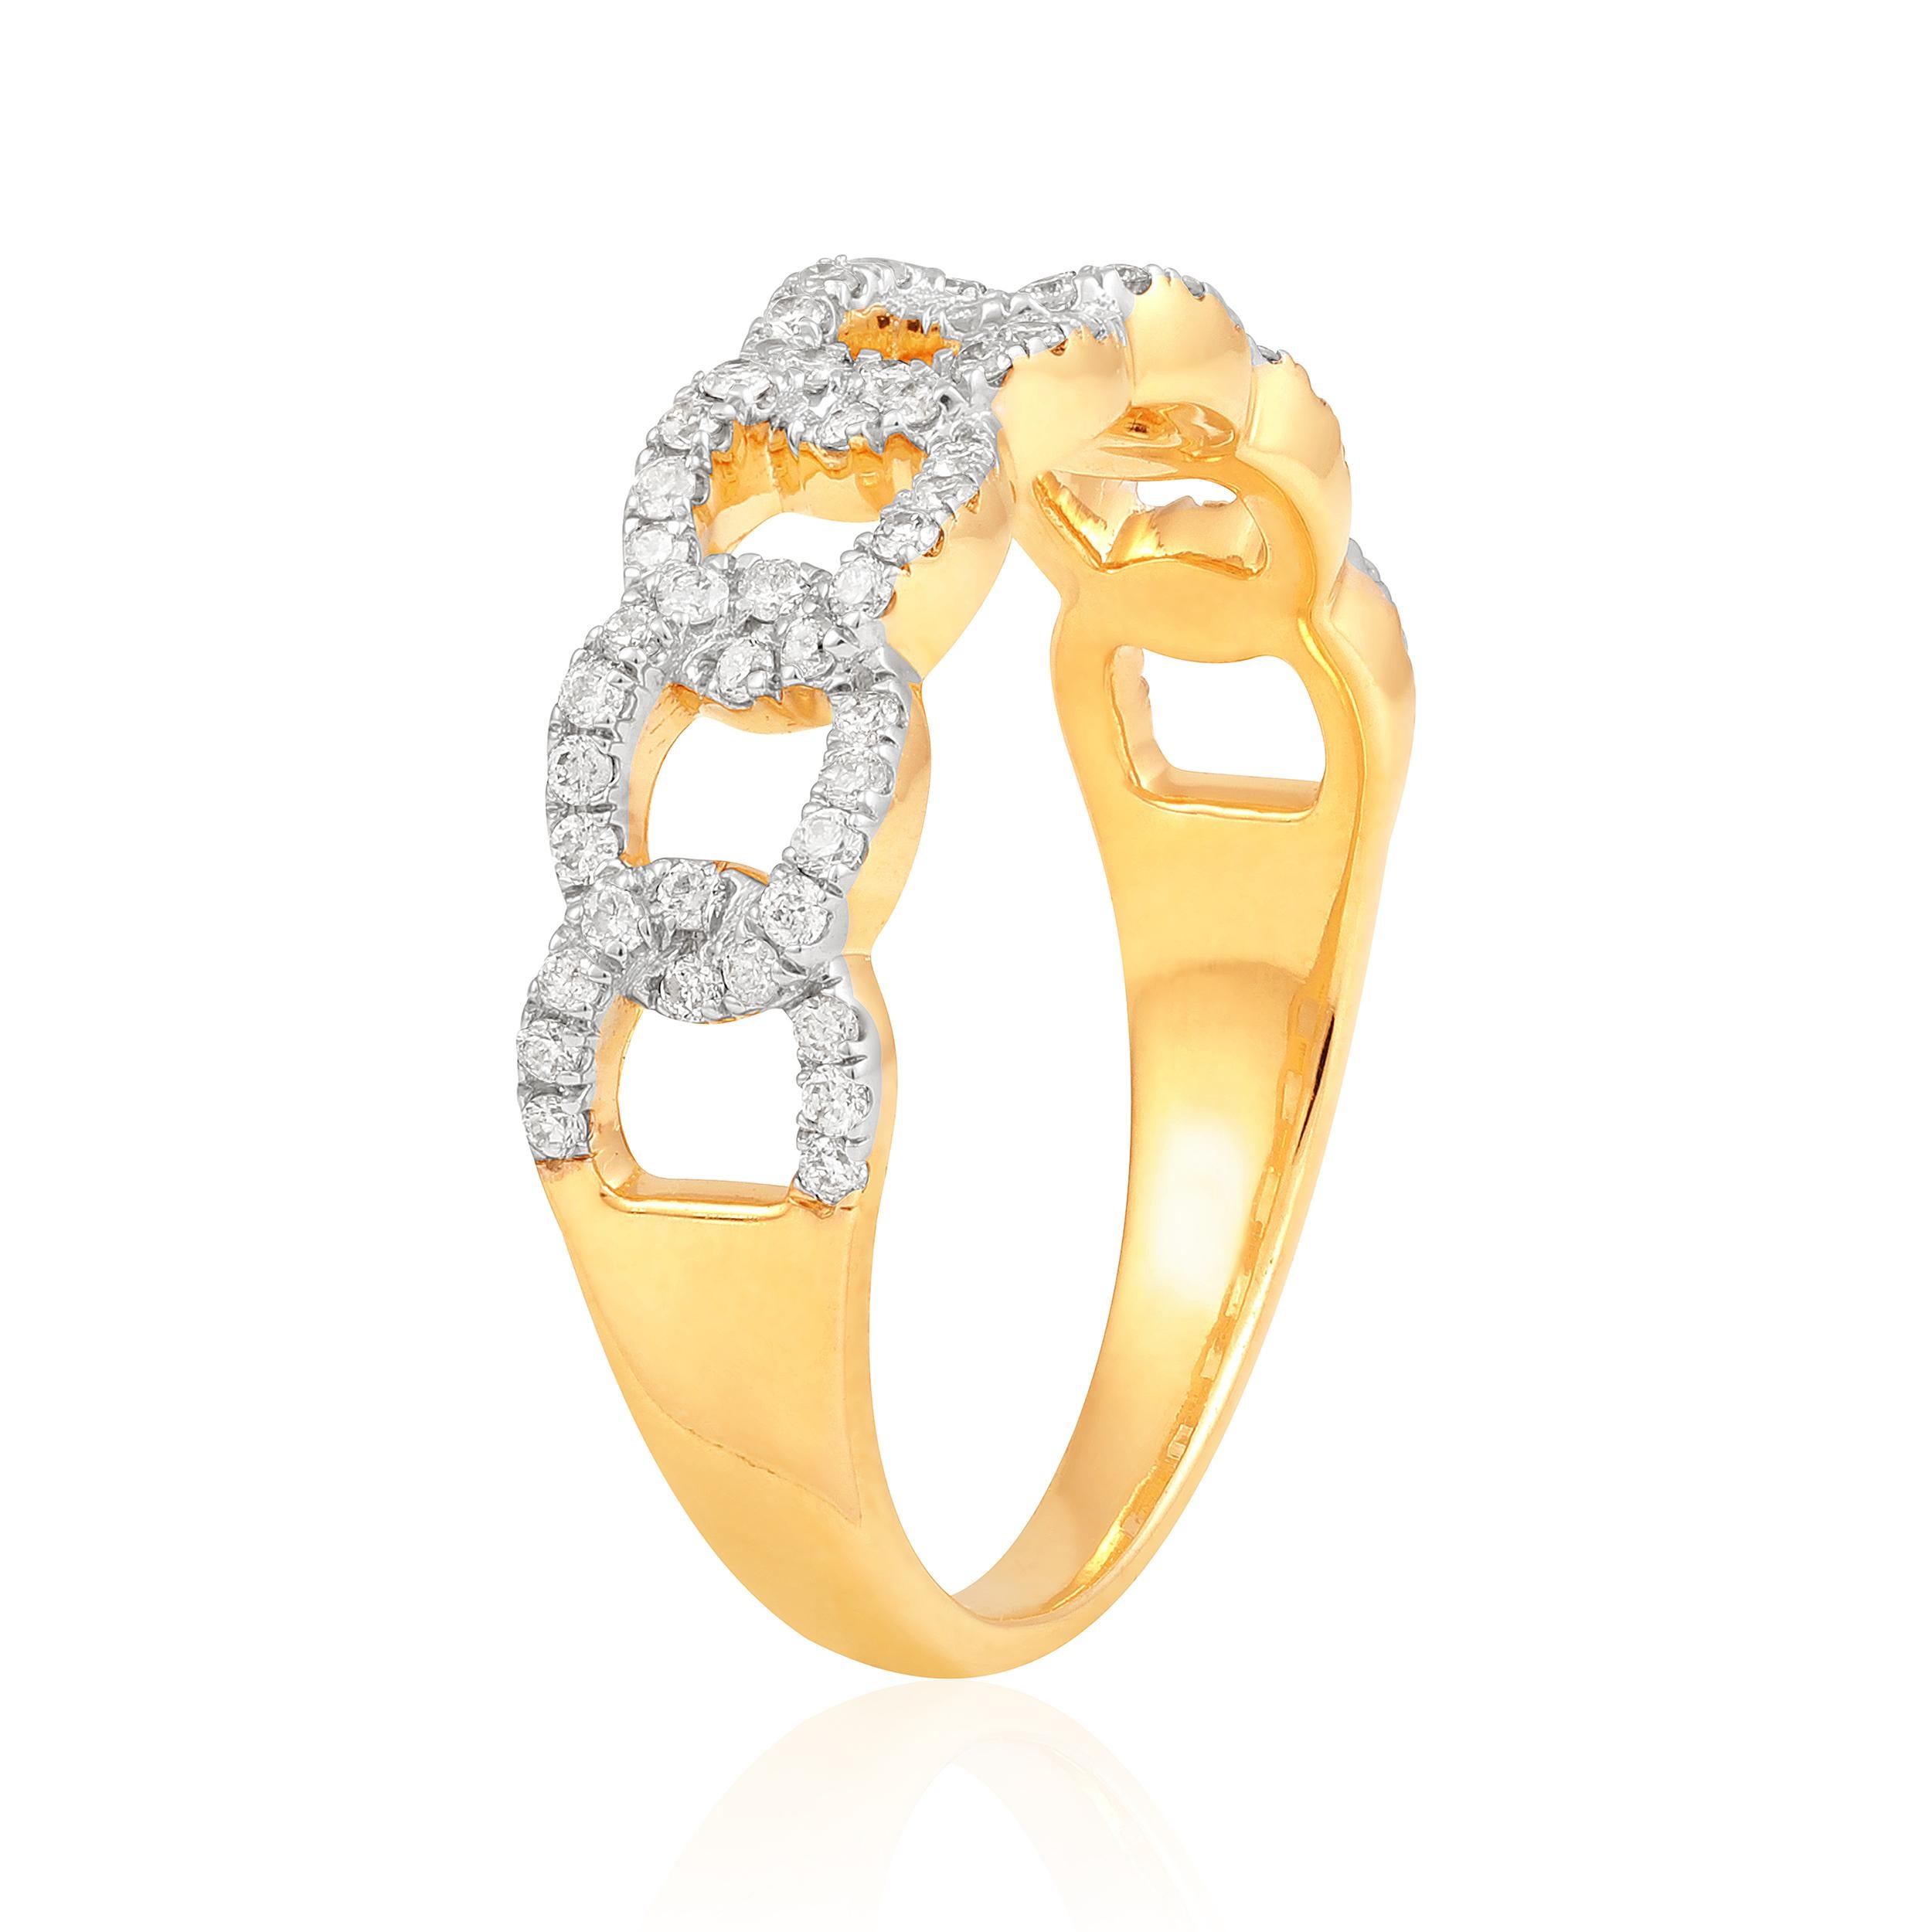 Ring Size: US 8 

Crafted in 3.06 grams of 10K Yellow Gold, the ring contains 76 stones of Round Diamonds with a total of 0.375 carat in F-G color and I1-I2 clarity.
This jewelry piece will be expertly crafted by our skilled artisans upon order.